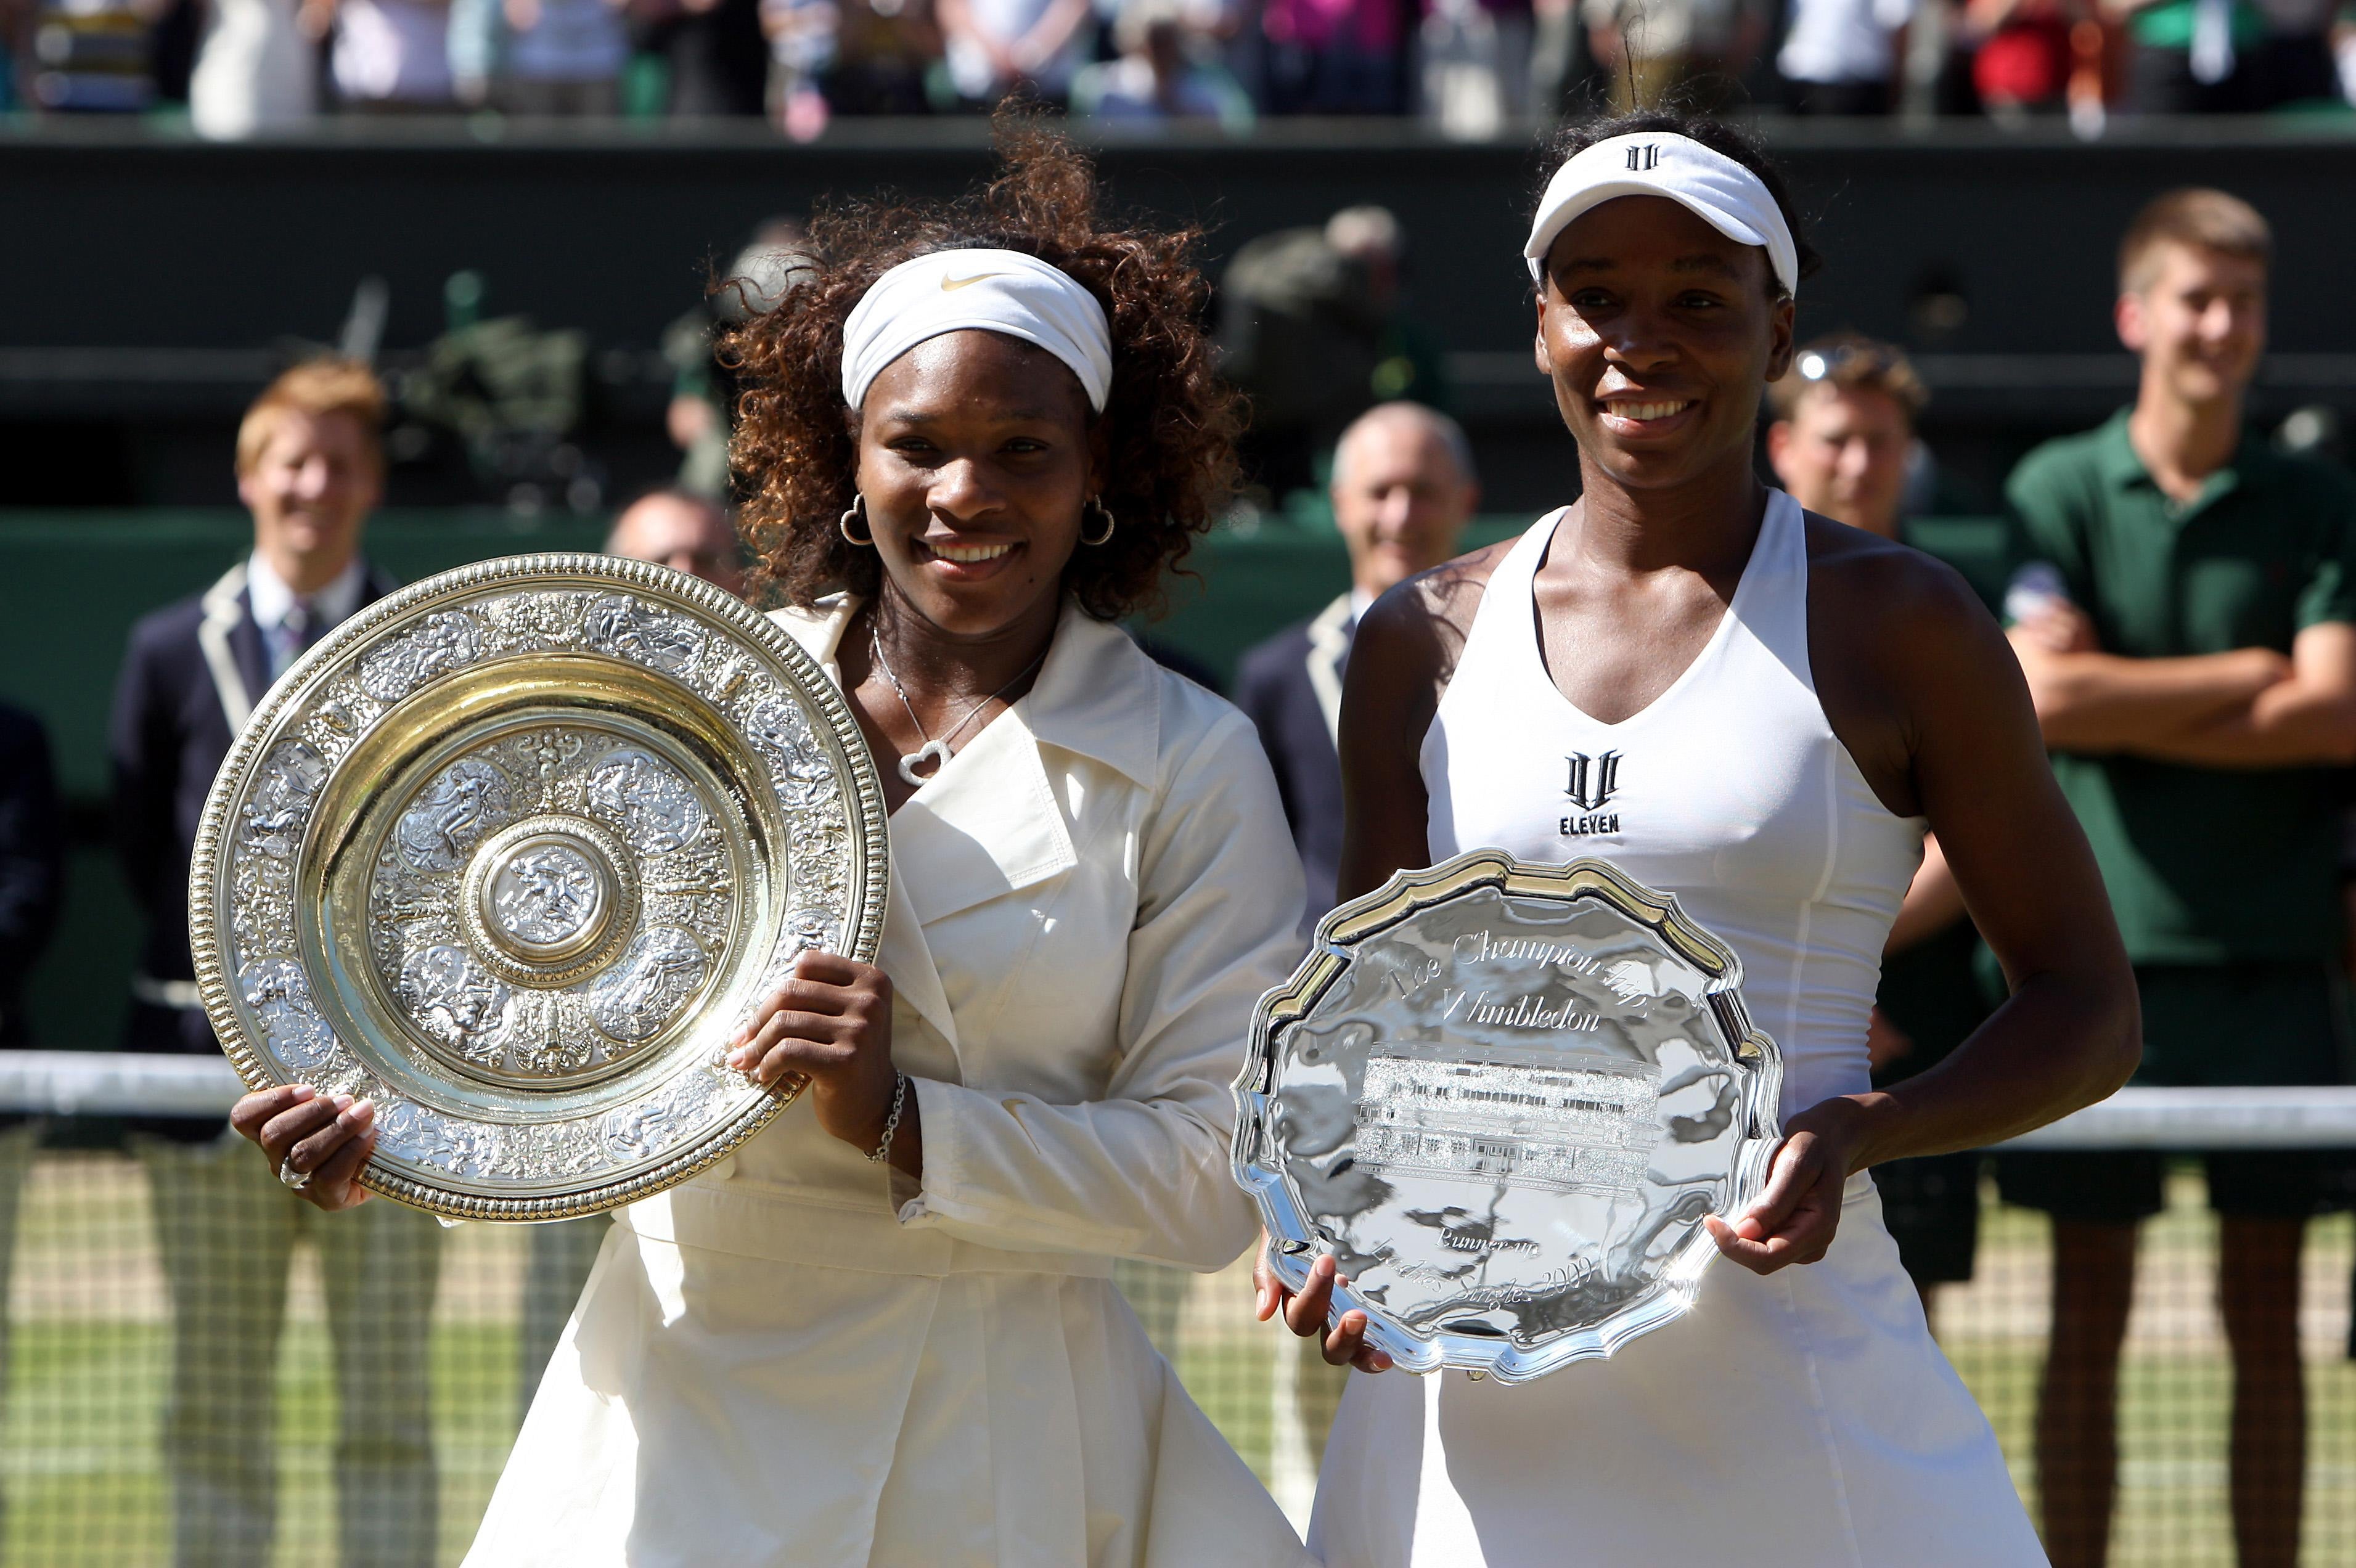 Serena Williams and Venus Williams after the 2009 Wimbledon women’s singles final (PA)